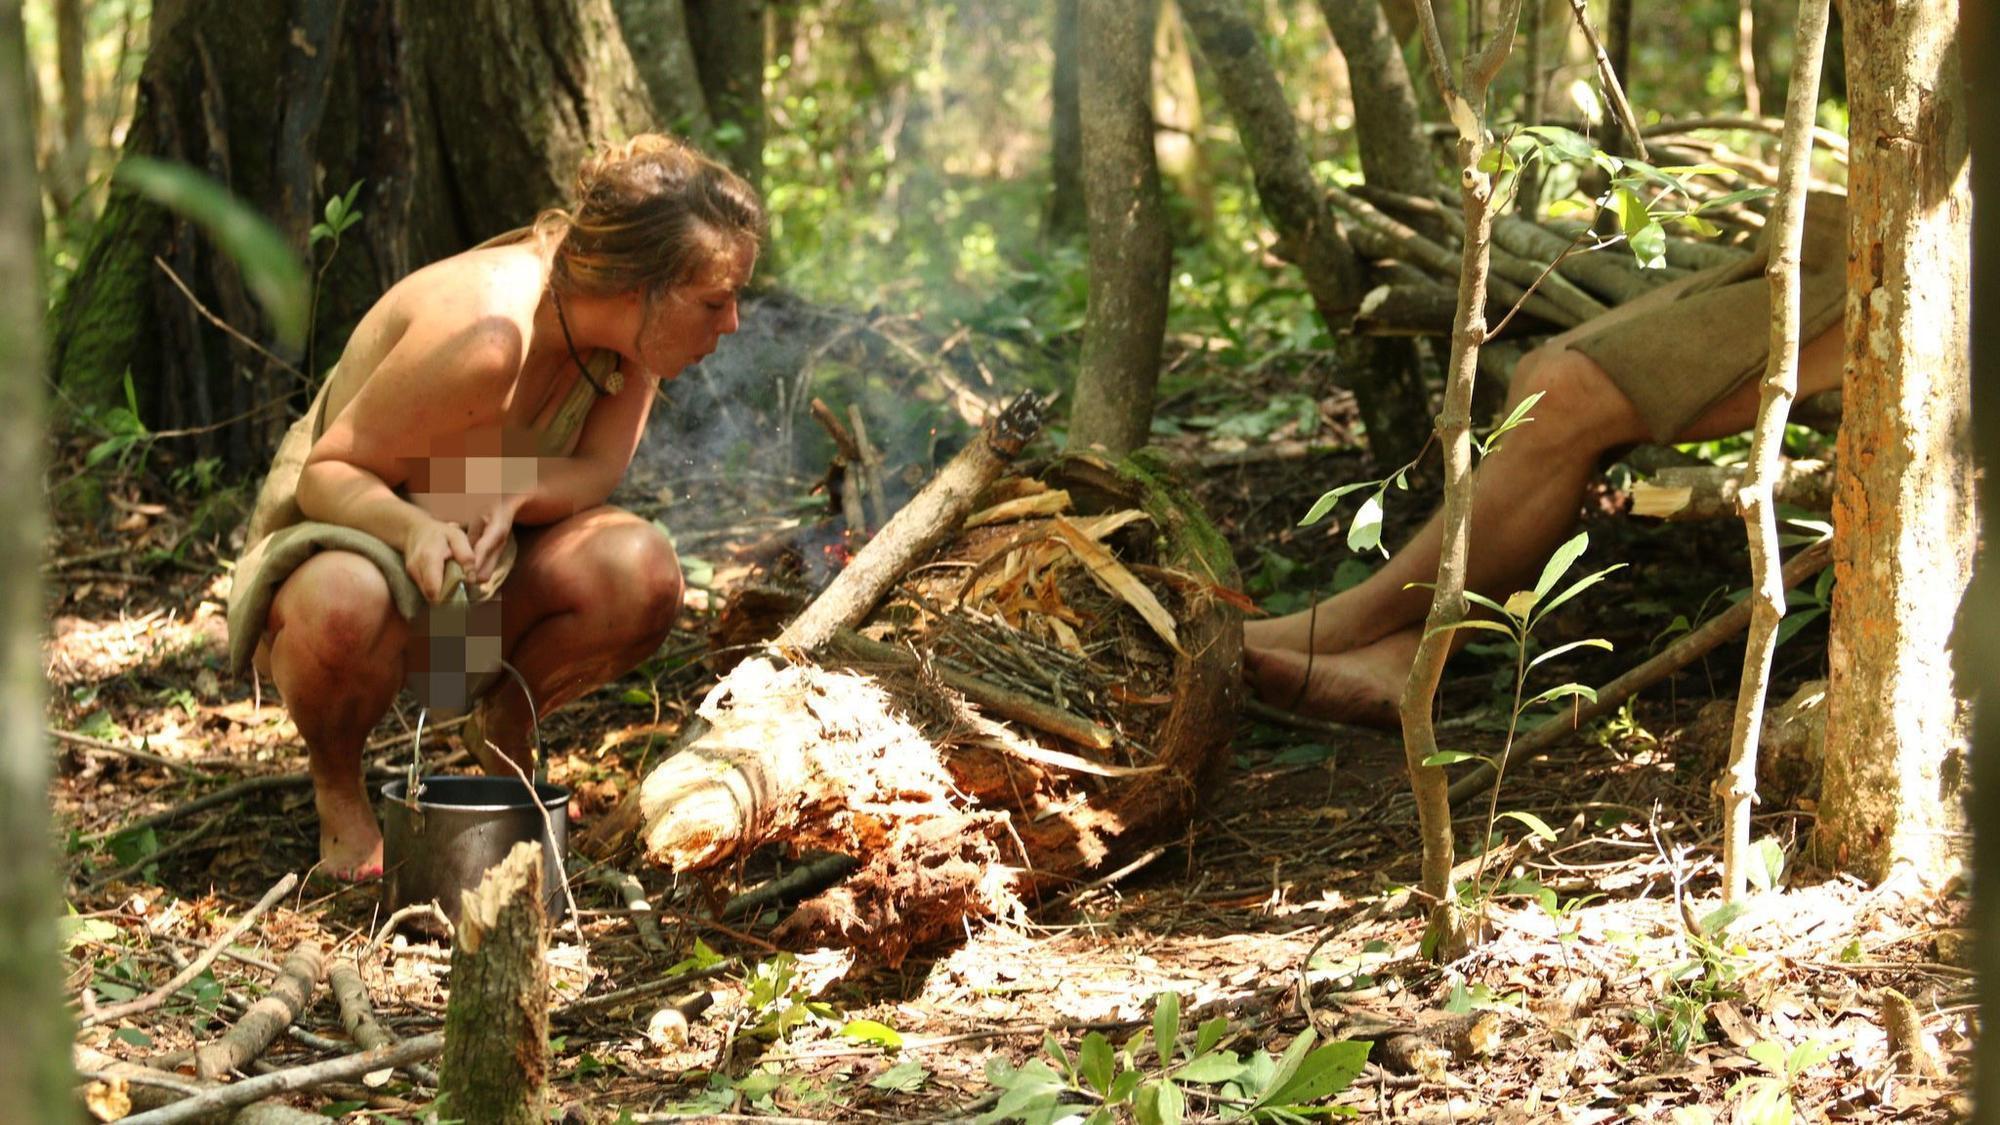 â€œWestminster woman to compete on 'Naked and Afraid' for a s...